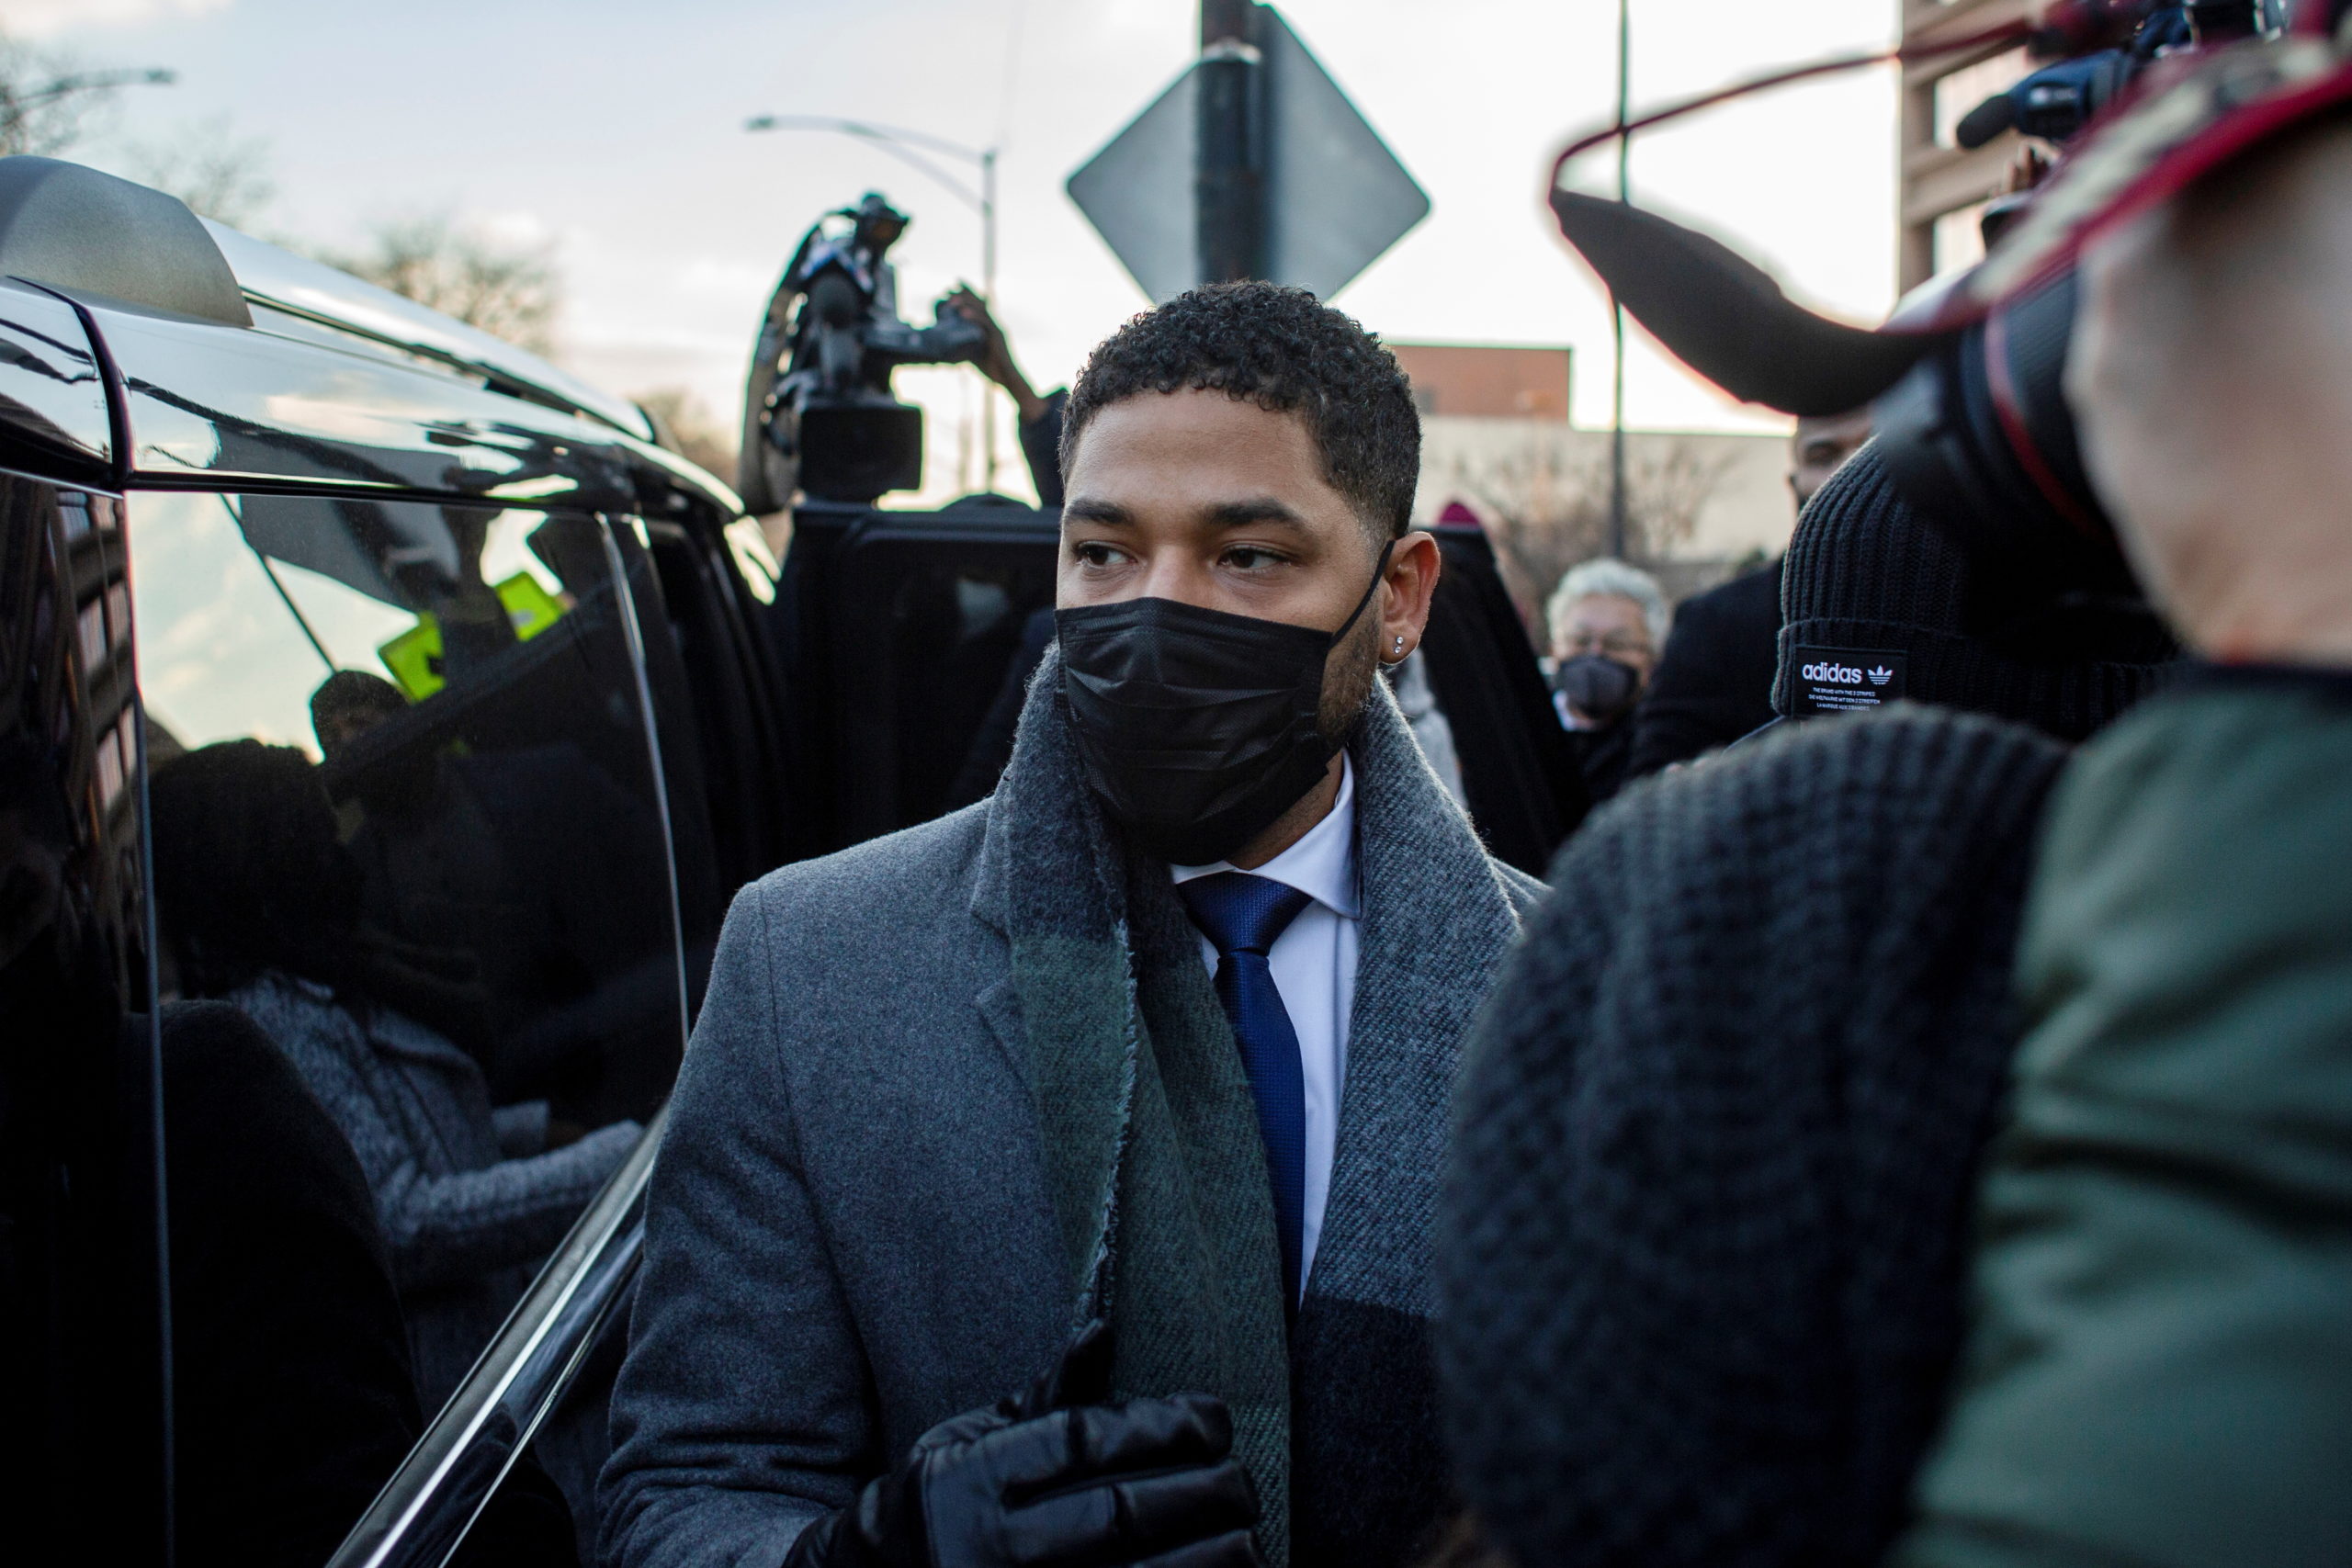 Former "Empire" actor Jussie Smollett leaves court during his trial for six counts of disorderly conduct on suspicion of making false reports to police, in Chicago, Illinois, U.S. December 8, 2021.  REUTERS/Jim Vondruska/File Photo